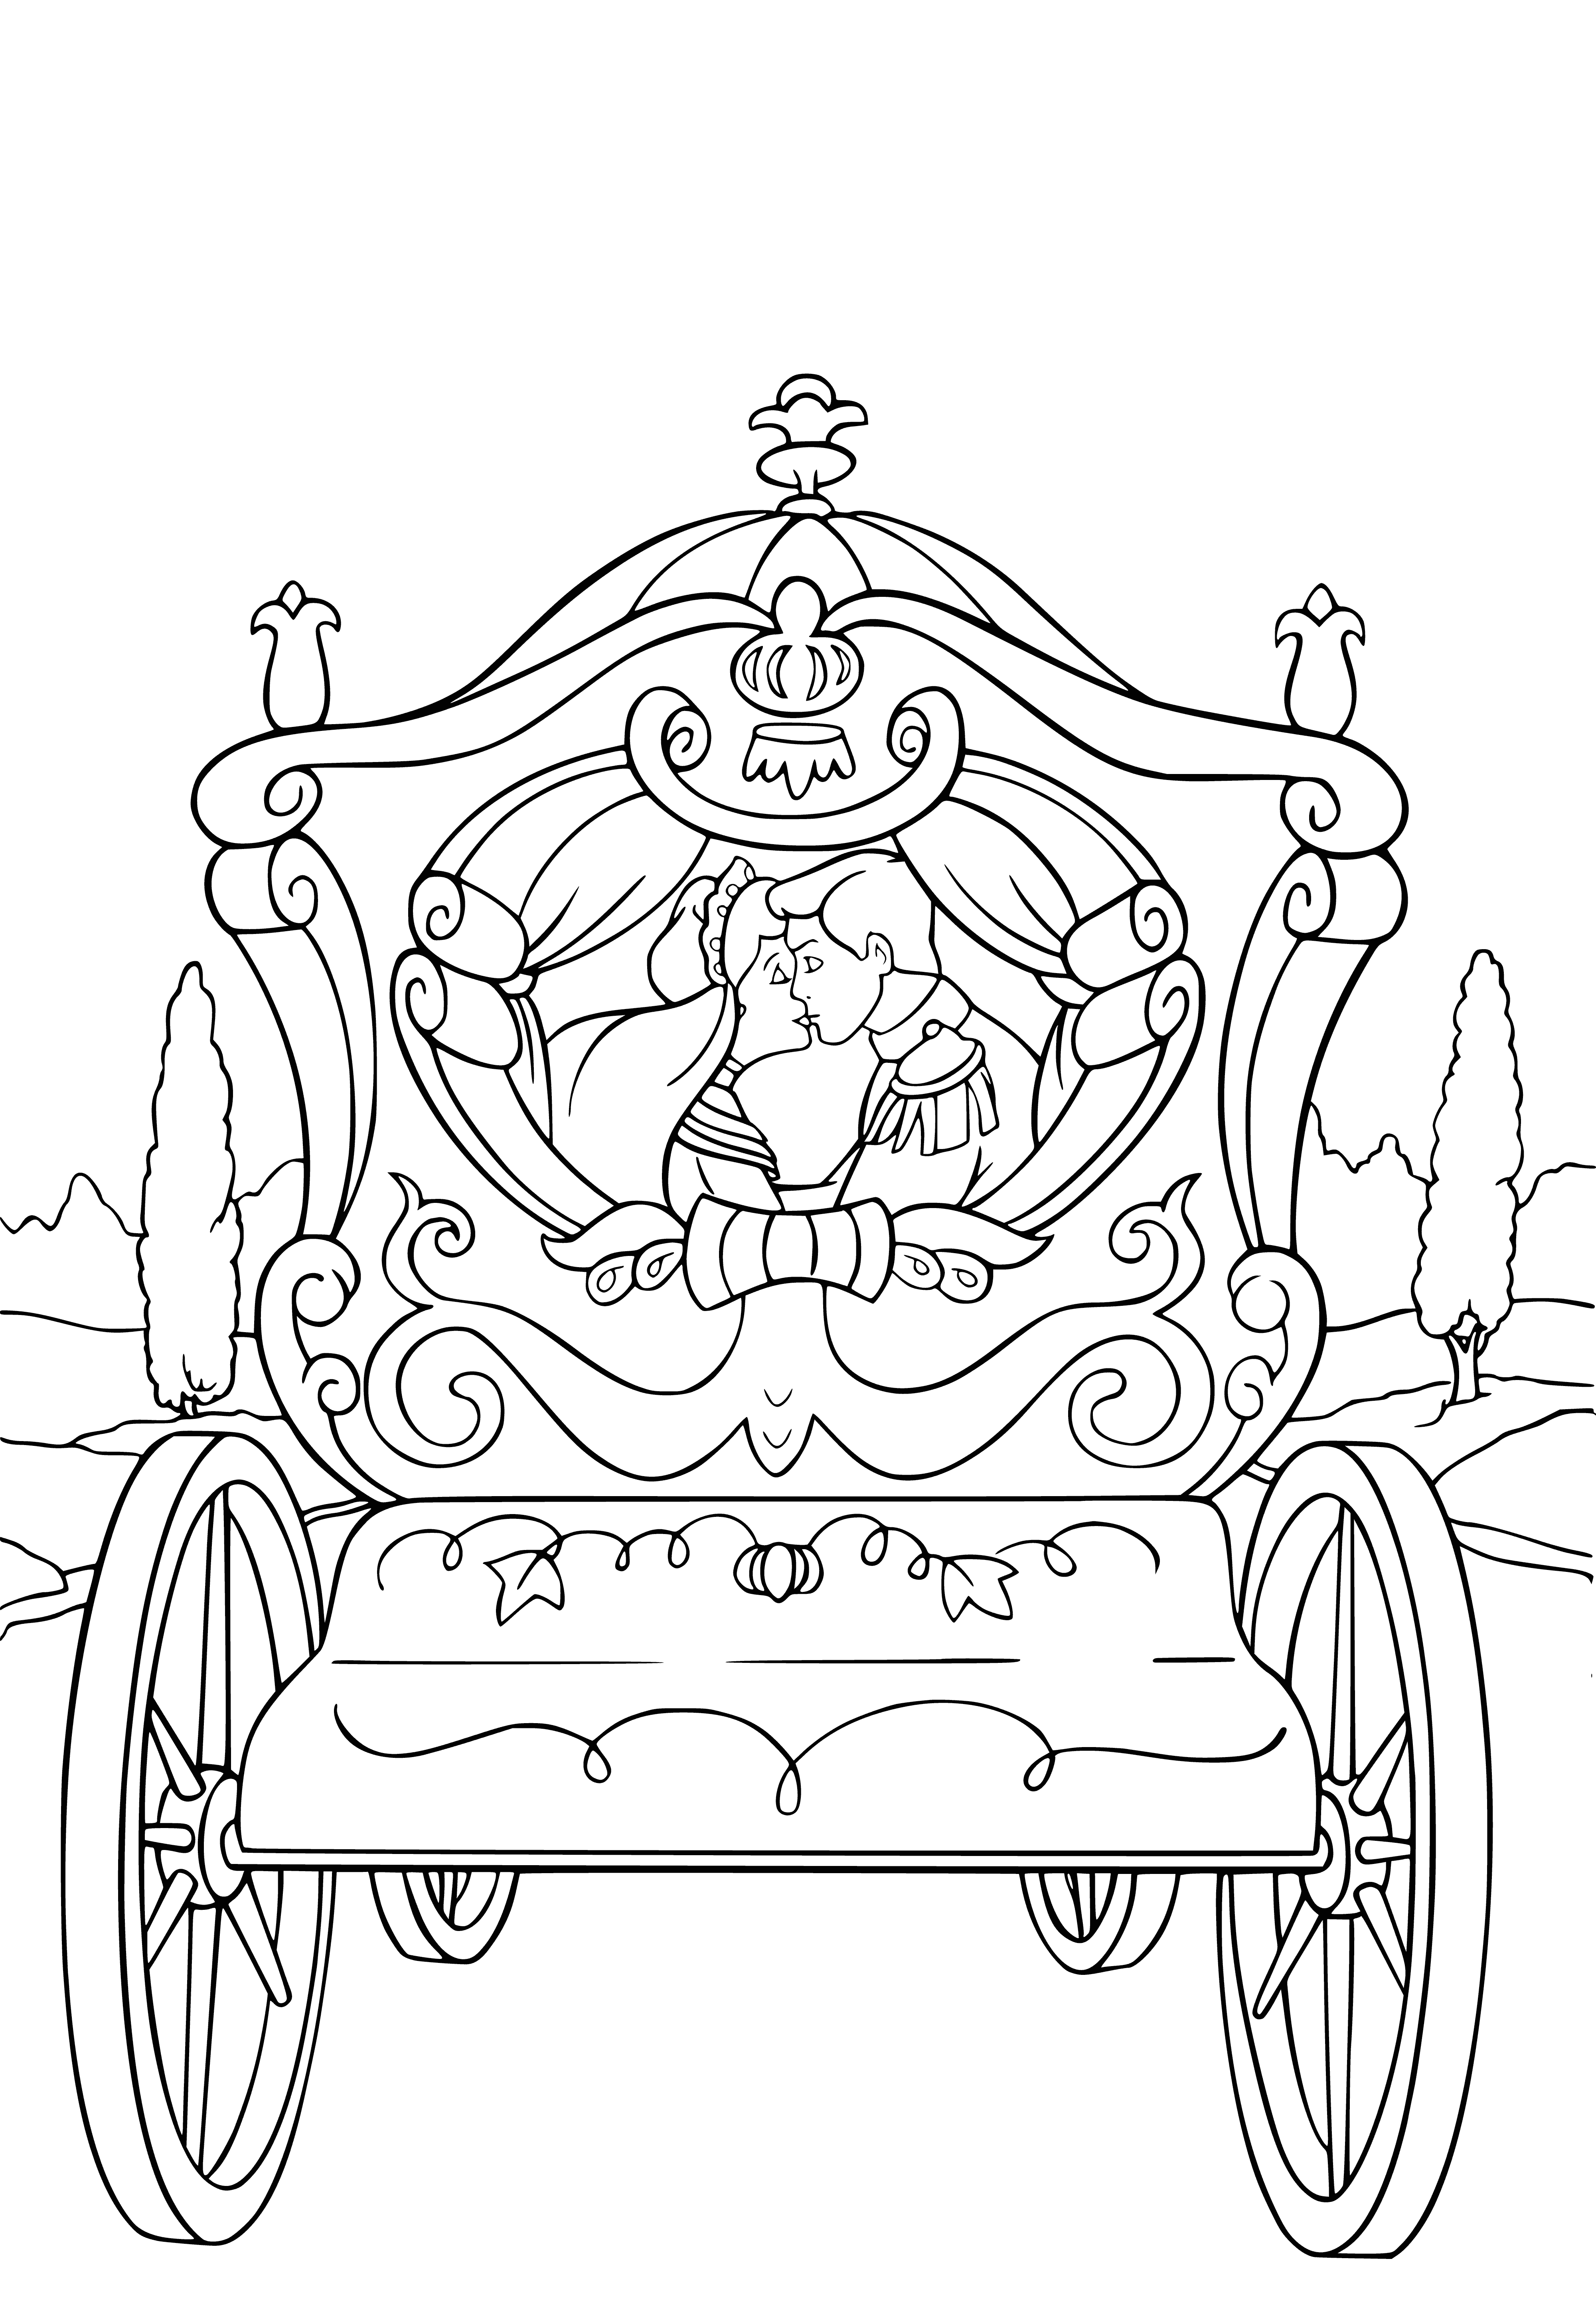 coloring page: Cinderella and prince are in a beautiful carriage, Cinderella in a blue gown, prince in a red cape. Smiling & happy.